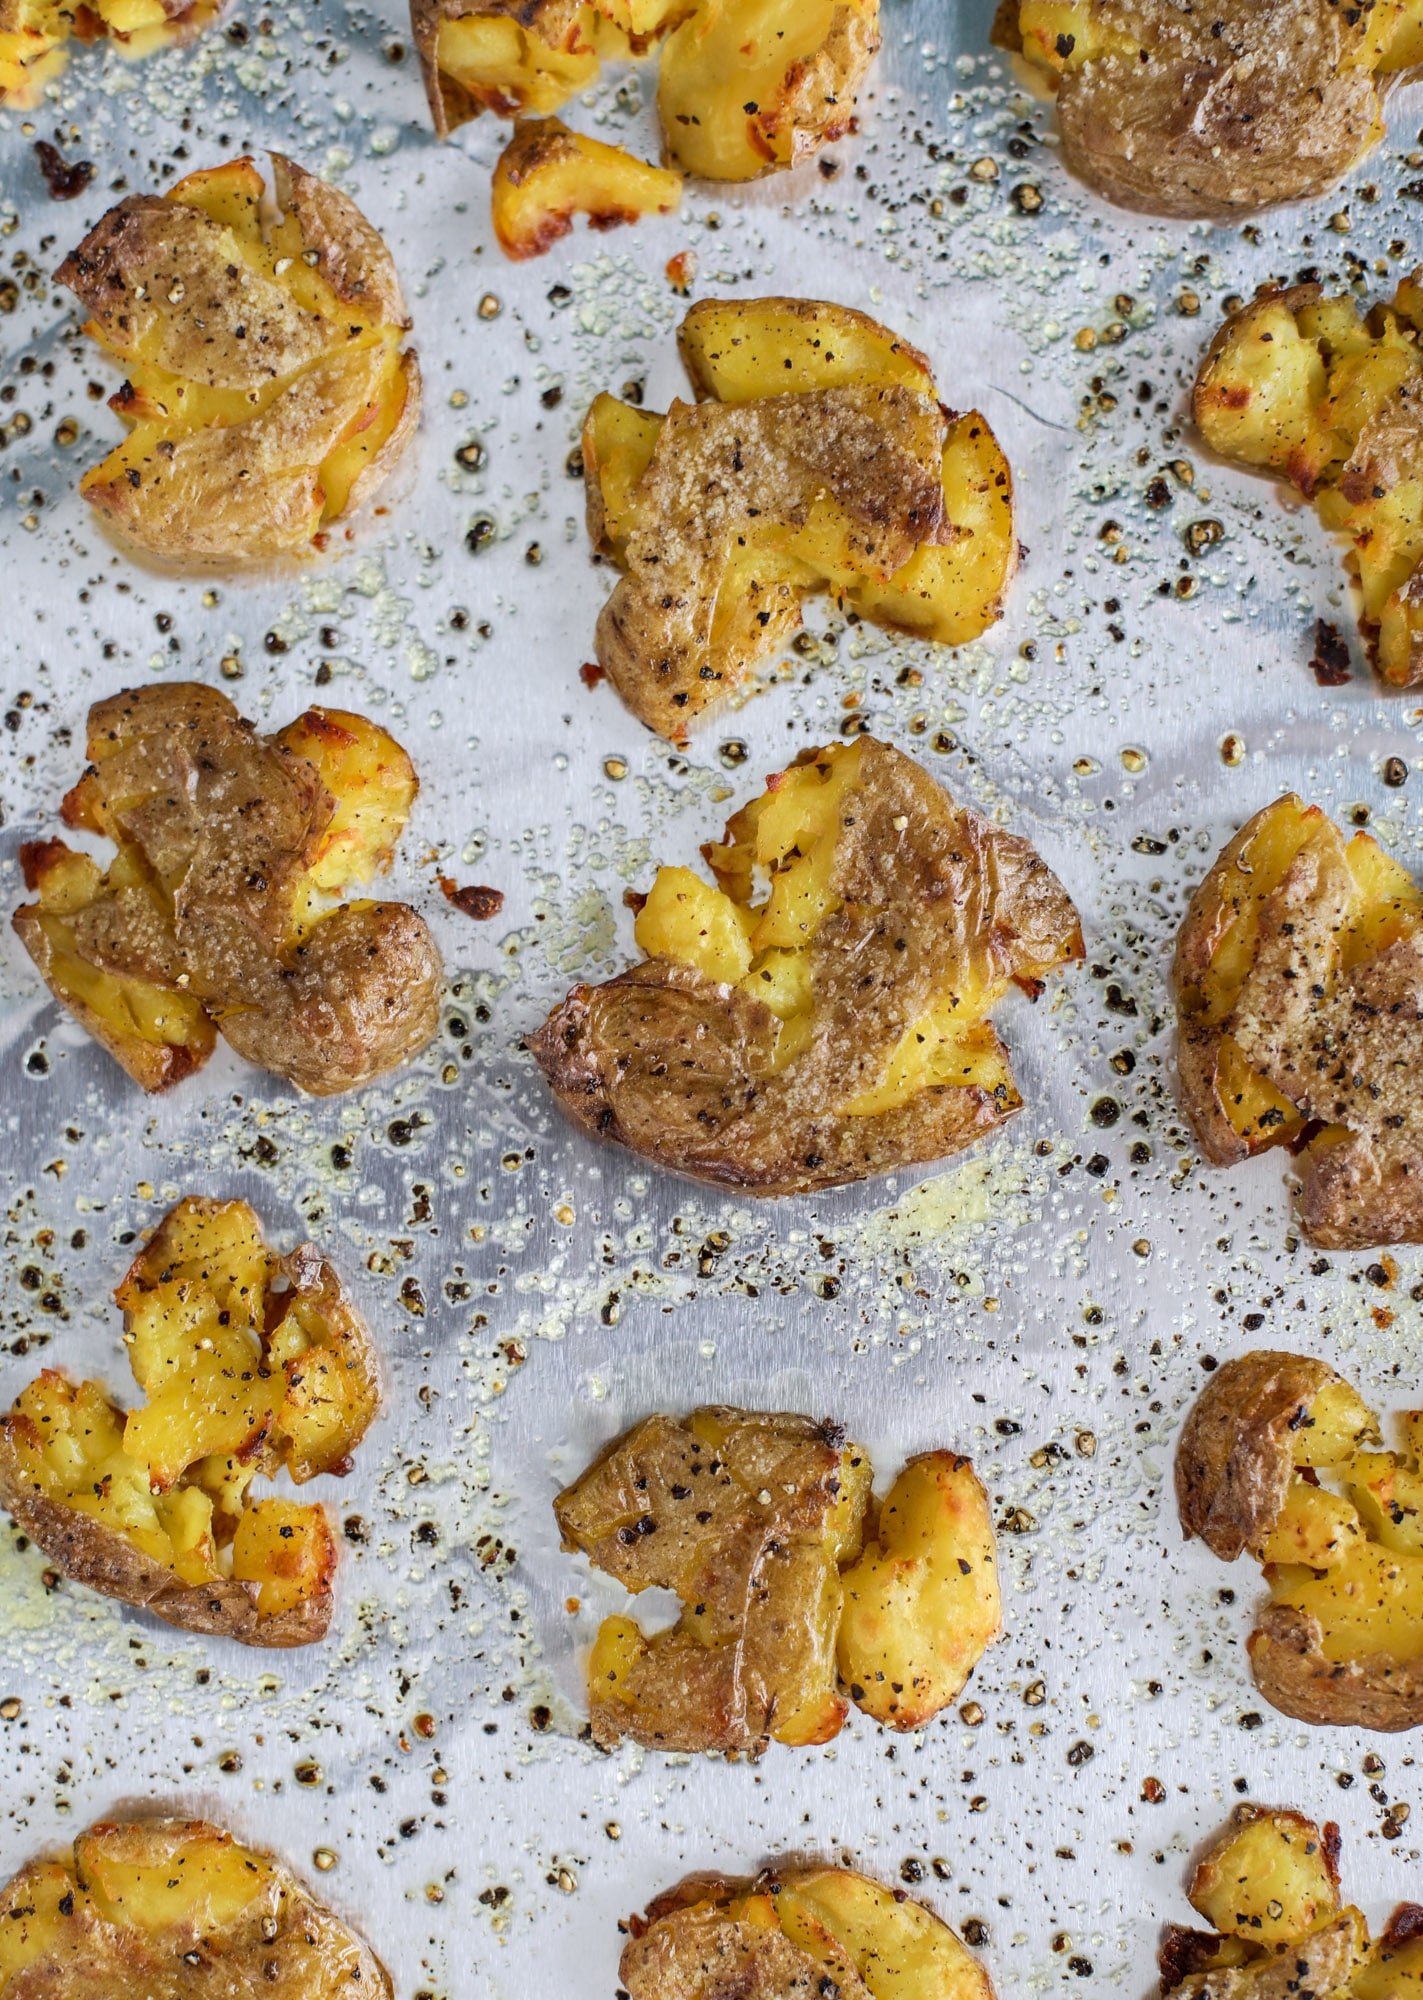 This is our favorite side dish ever! Crispy smashed potatoes roasted in the oven to perfection. Serve them with a dipping sauce or as a side dish!